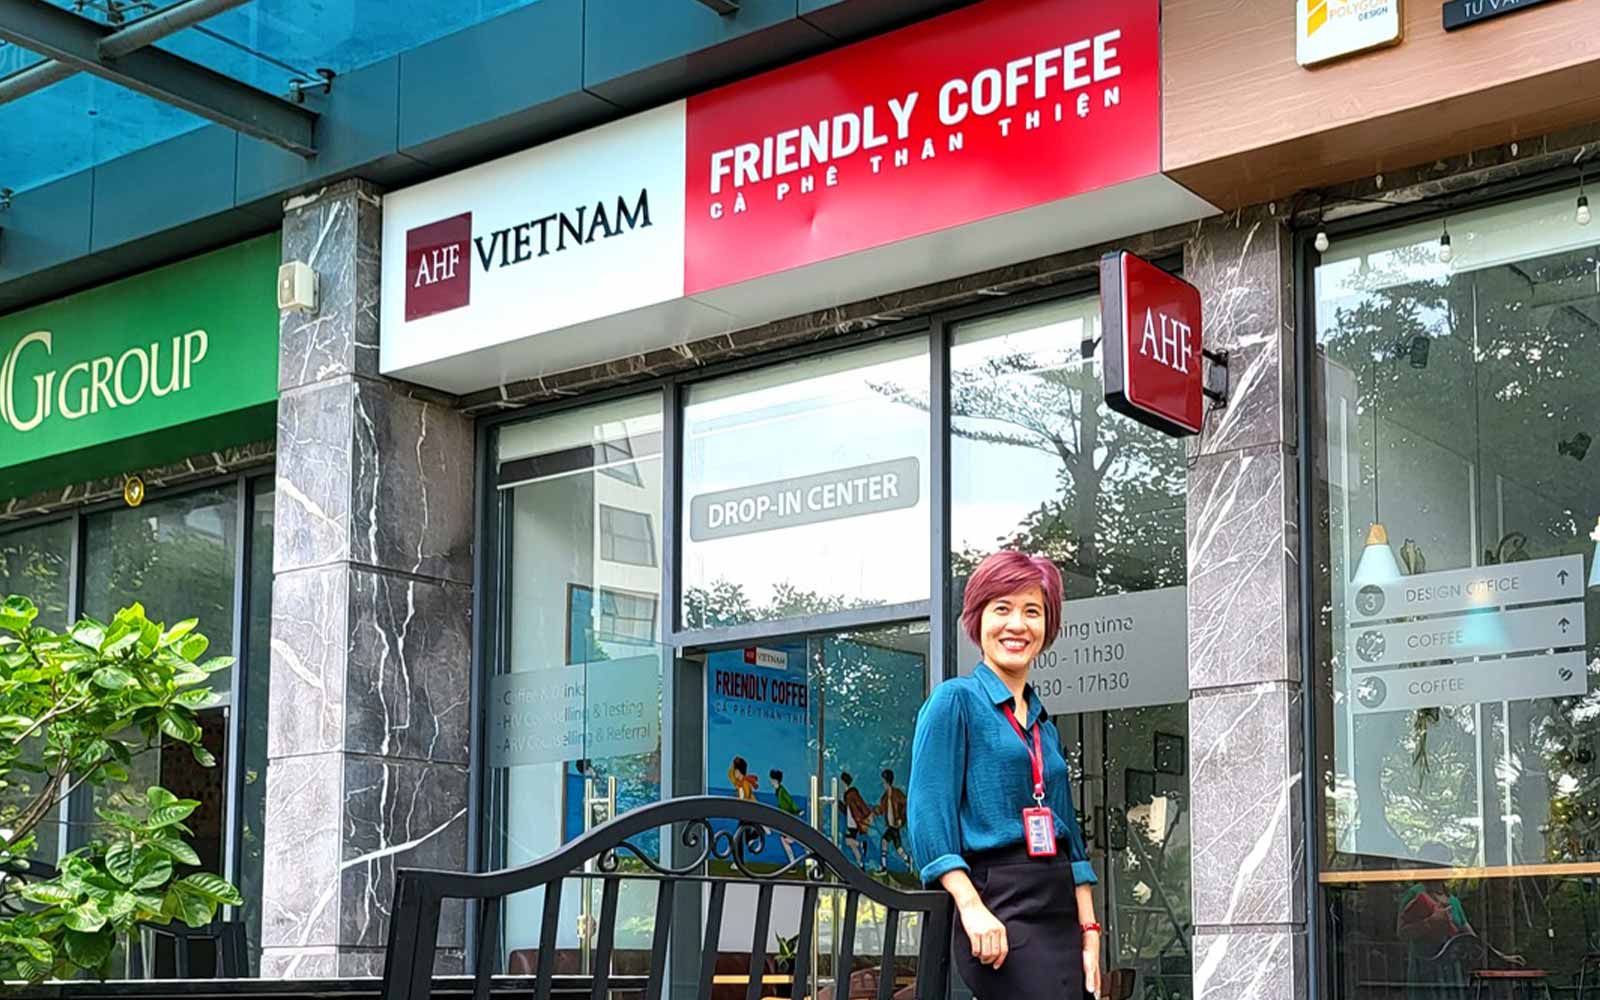 AHF Vietnam's Staff pausing in front of the Friendly Caf� entrance